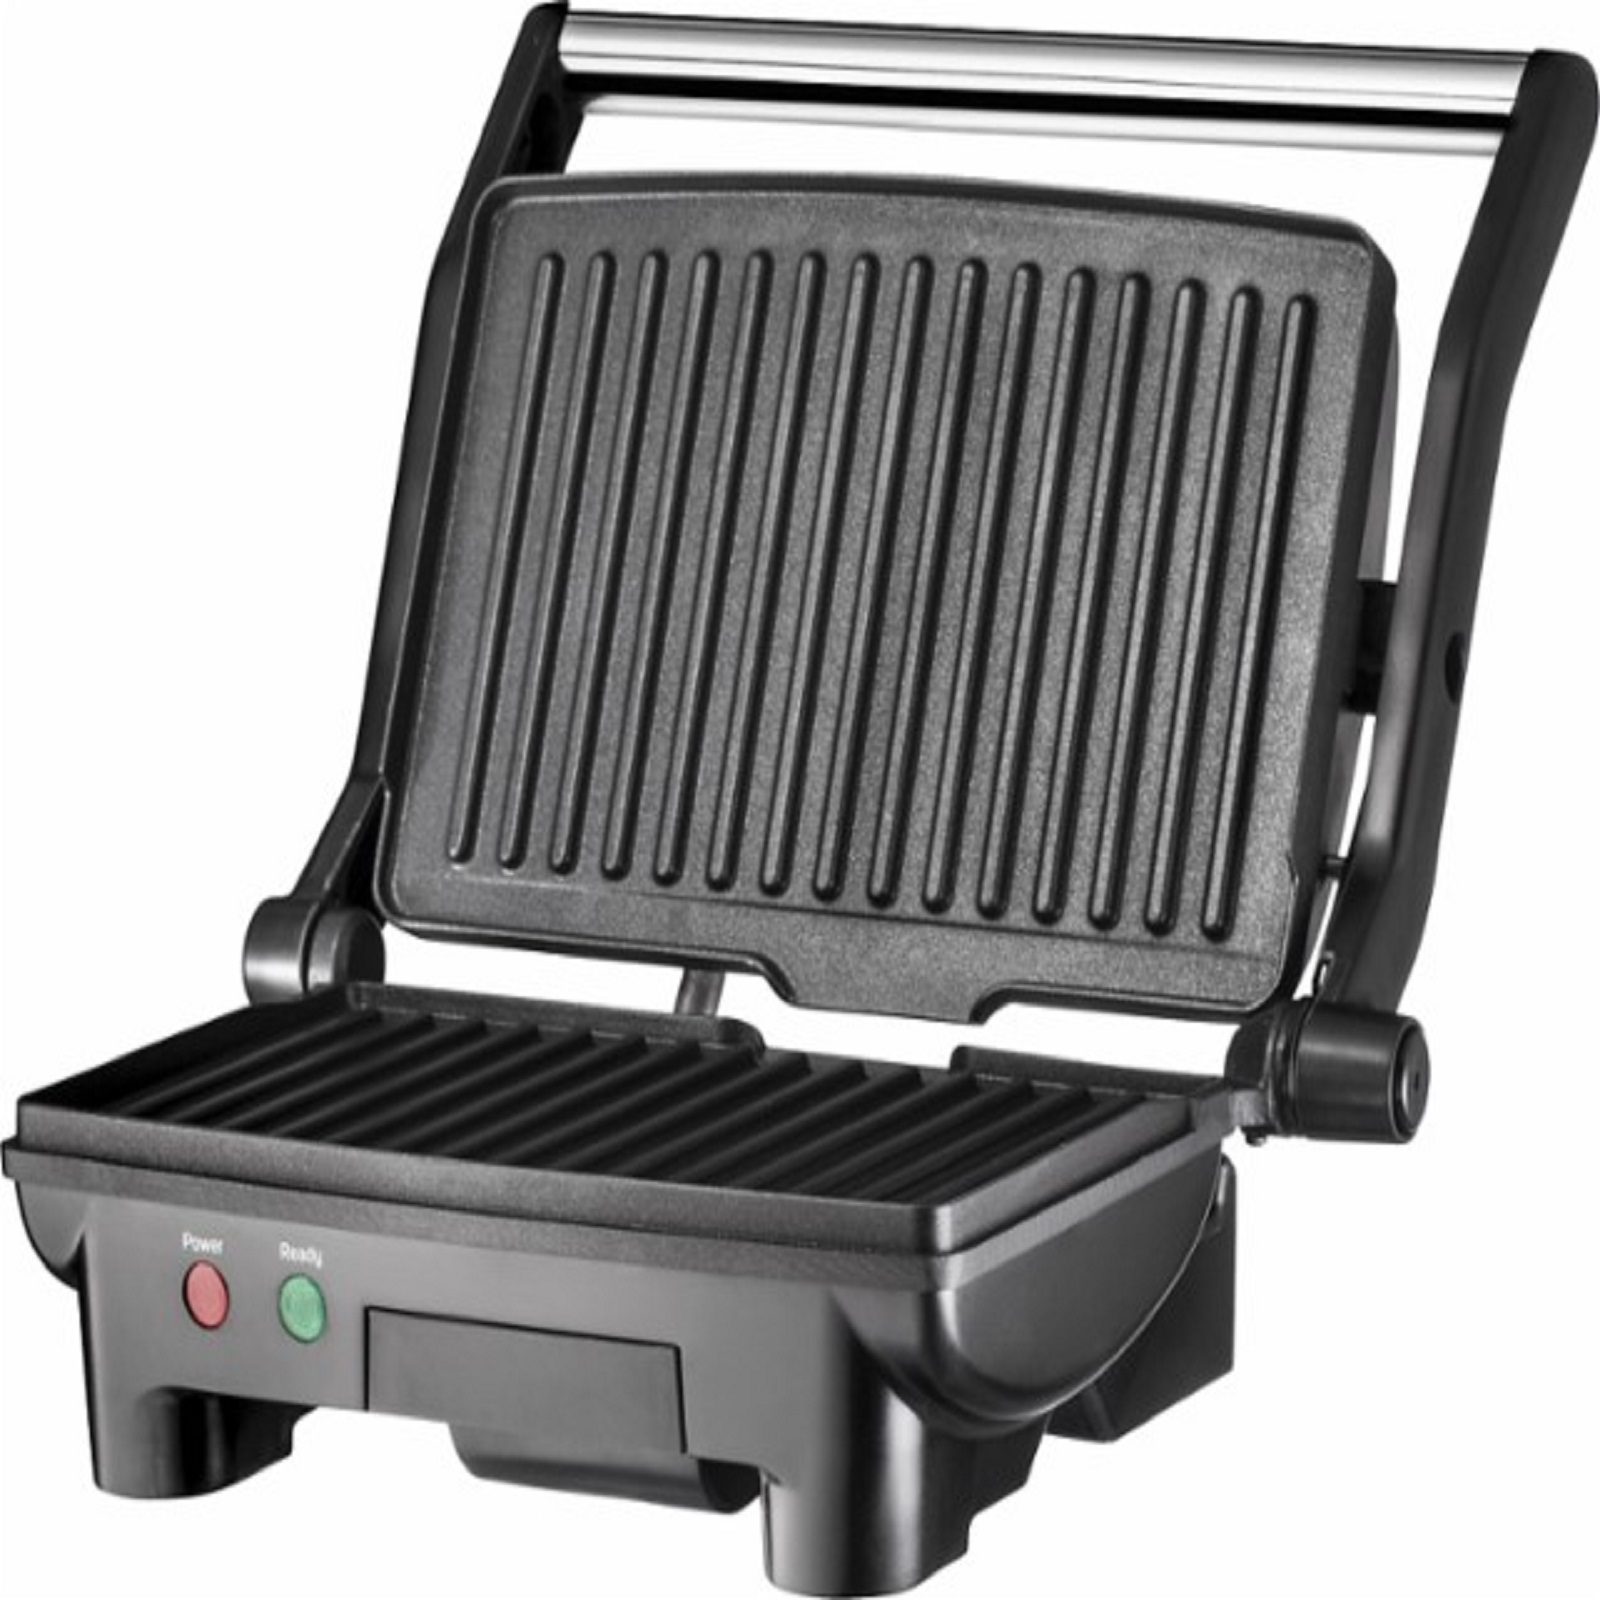 CHEFMAN RJ02-180 180&#176; Foldable 3-in-1 Panini Press and Grill